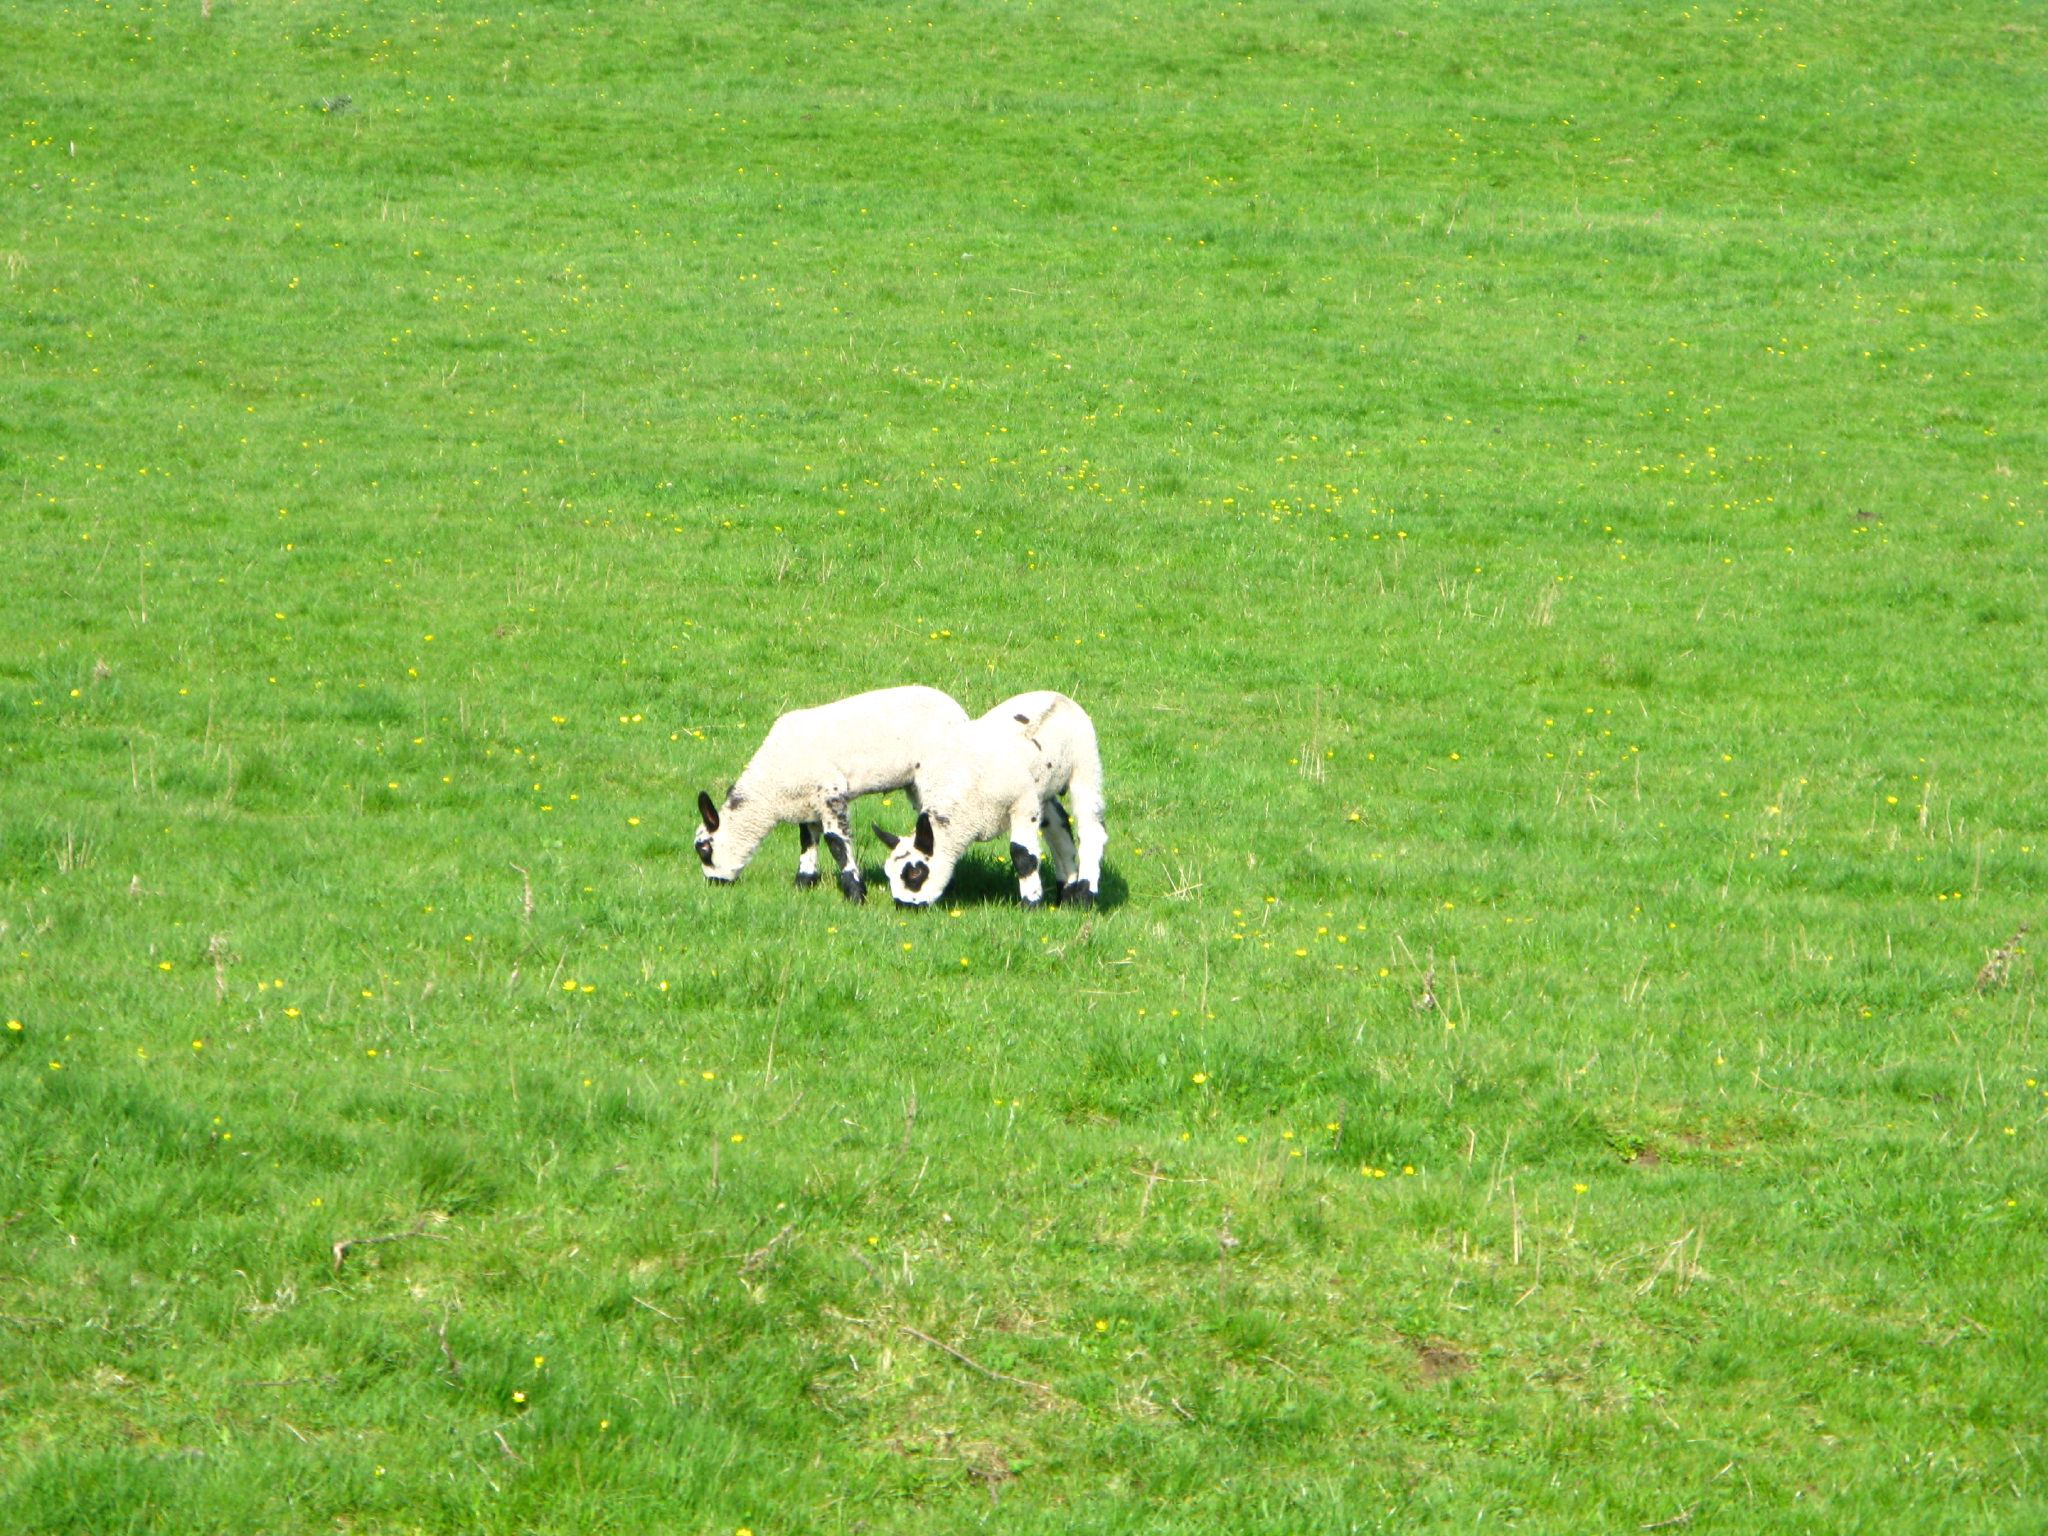 two animals in a field grazing on some grass